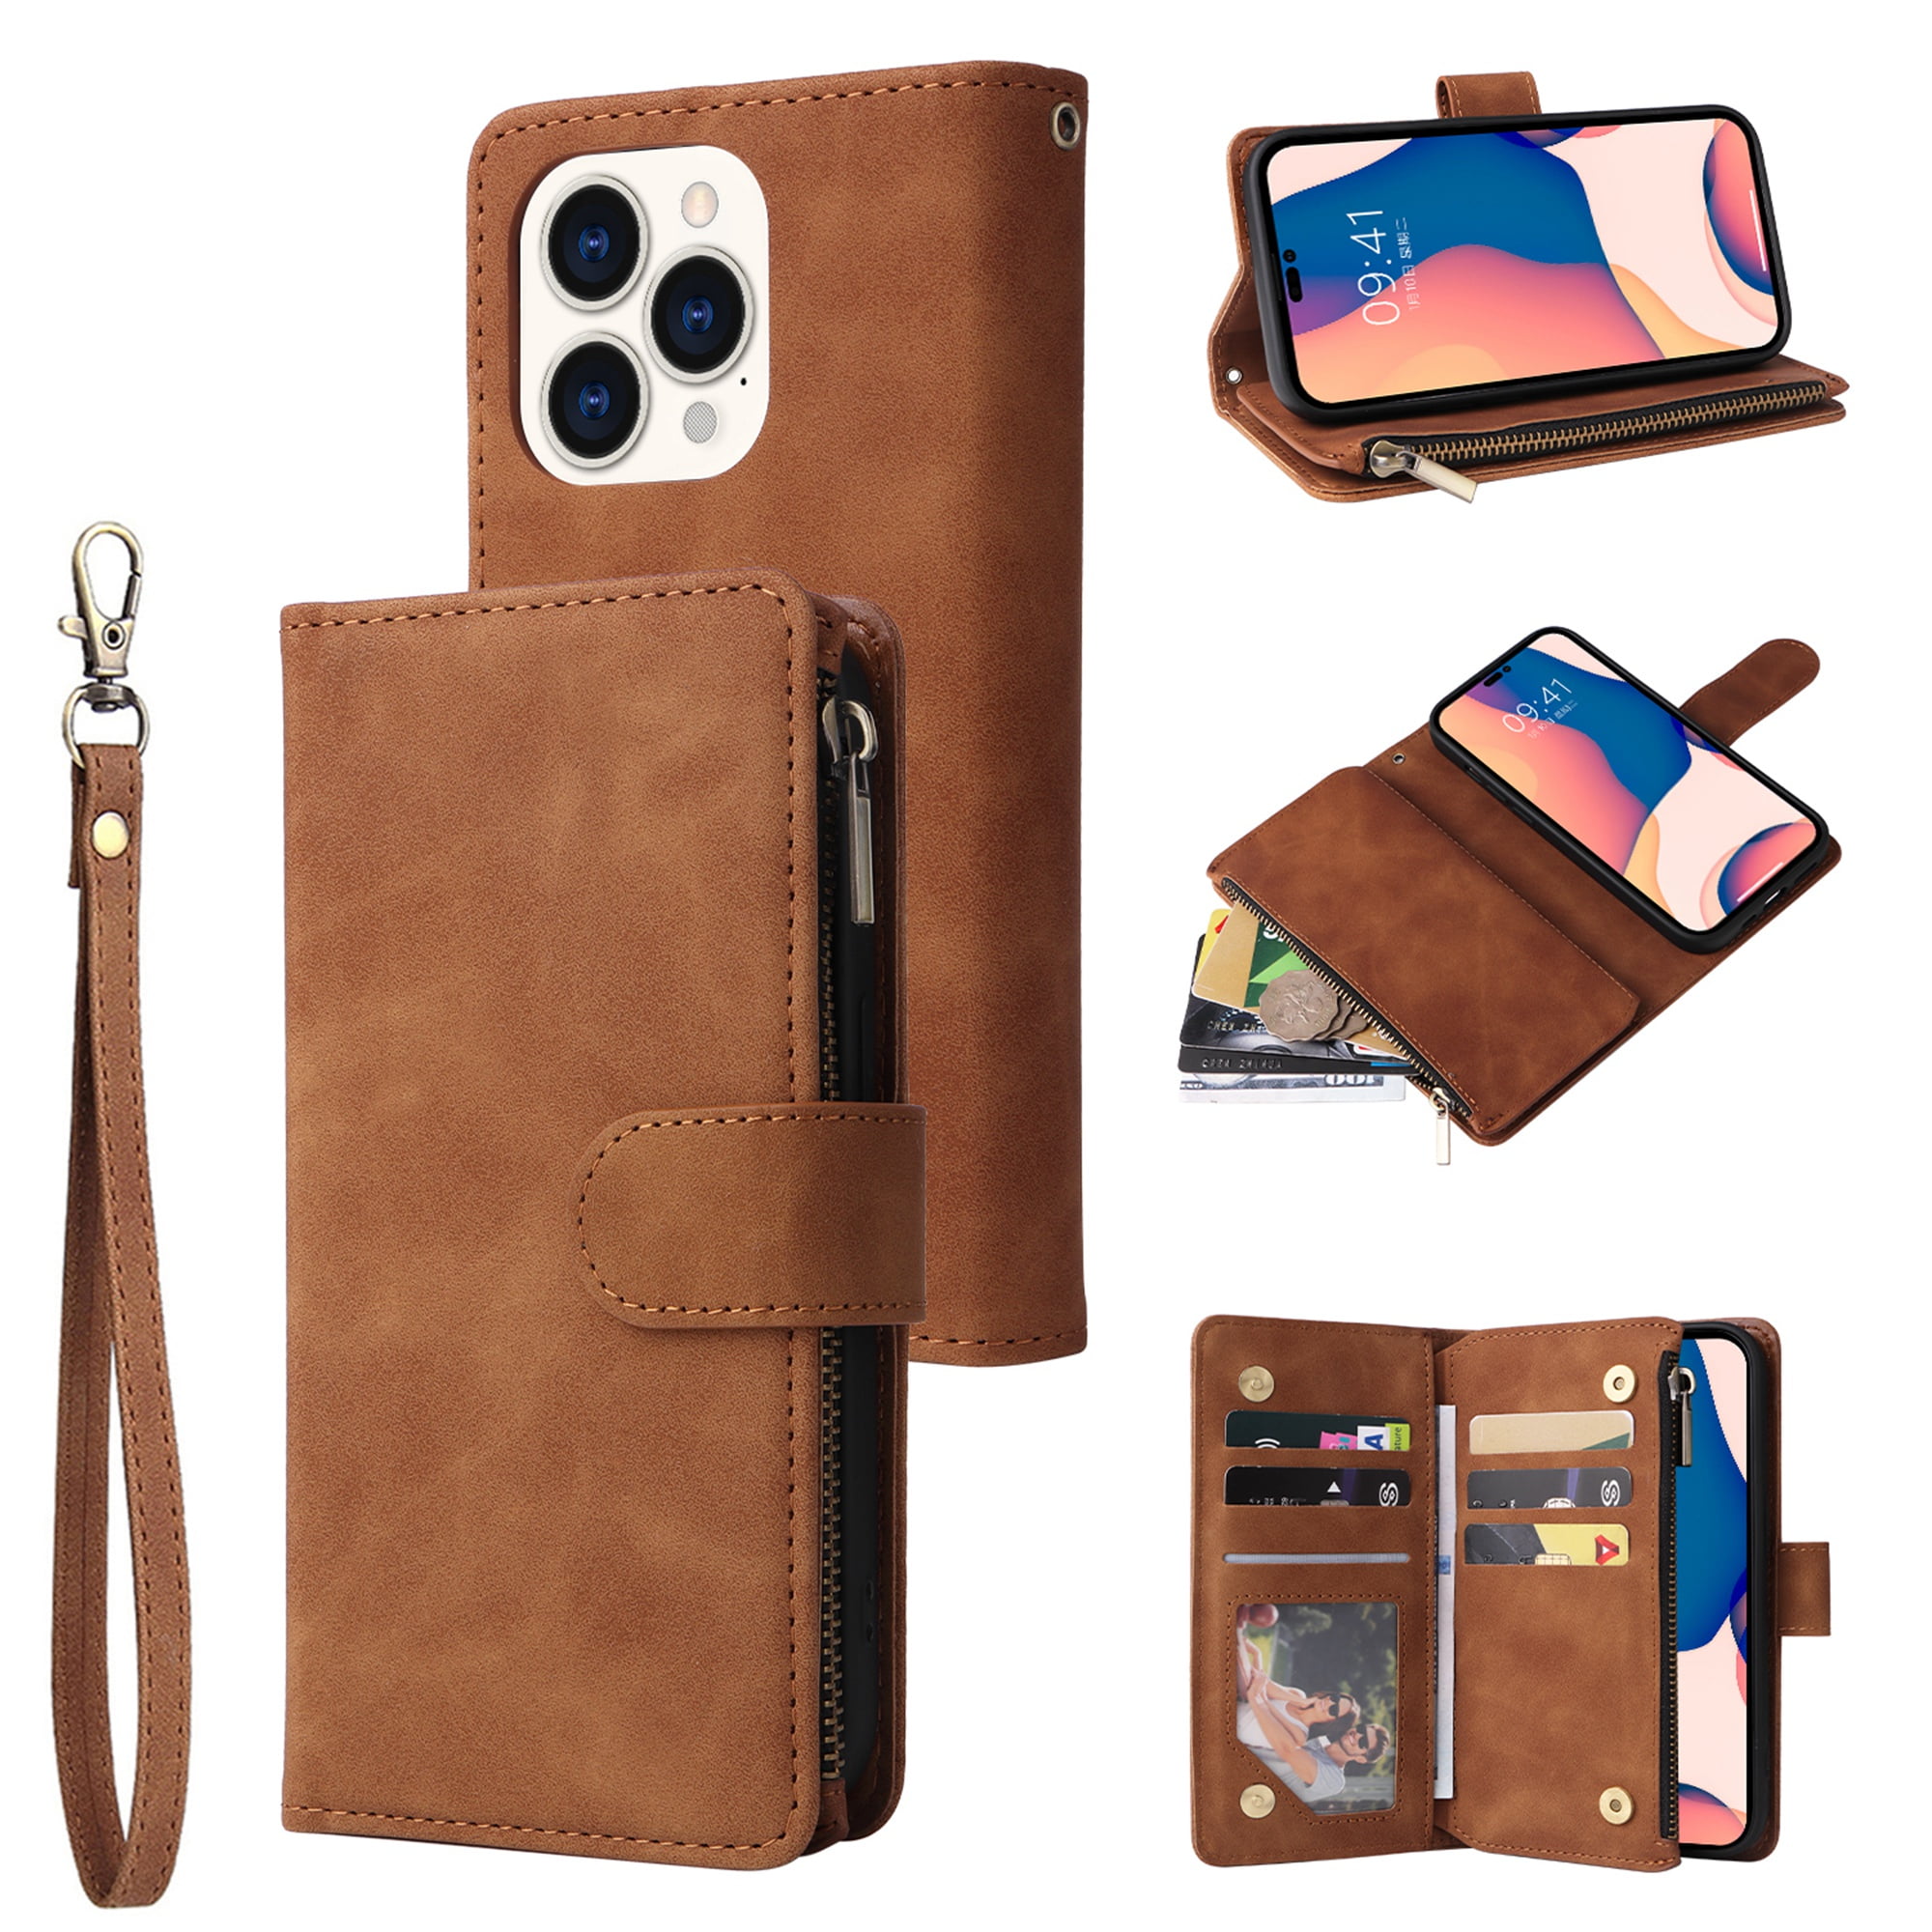 Decase for iPhone 14 Pro Max Case, Wallet Card Holder Luxury PU Leather  Cover Lanyard Crossbody Strap Women Girl Magnetic Clasp Kickstand Heavy  Duty